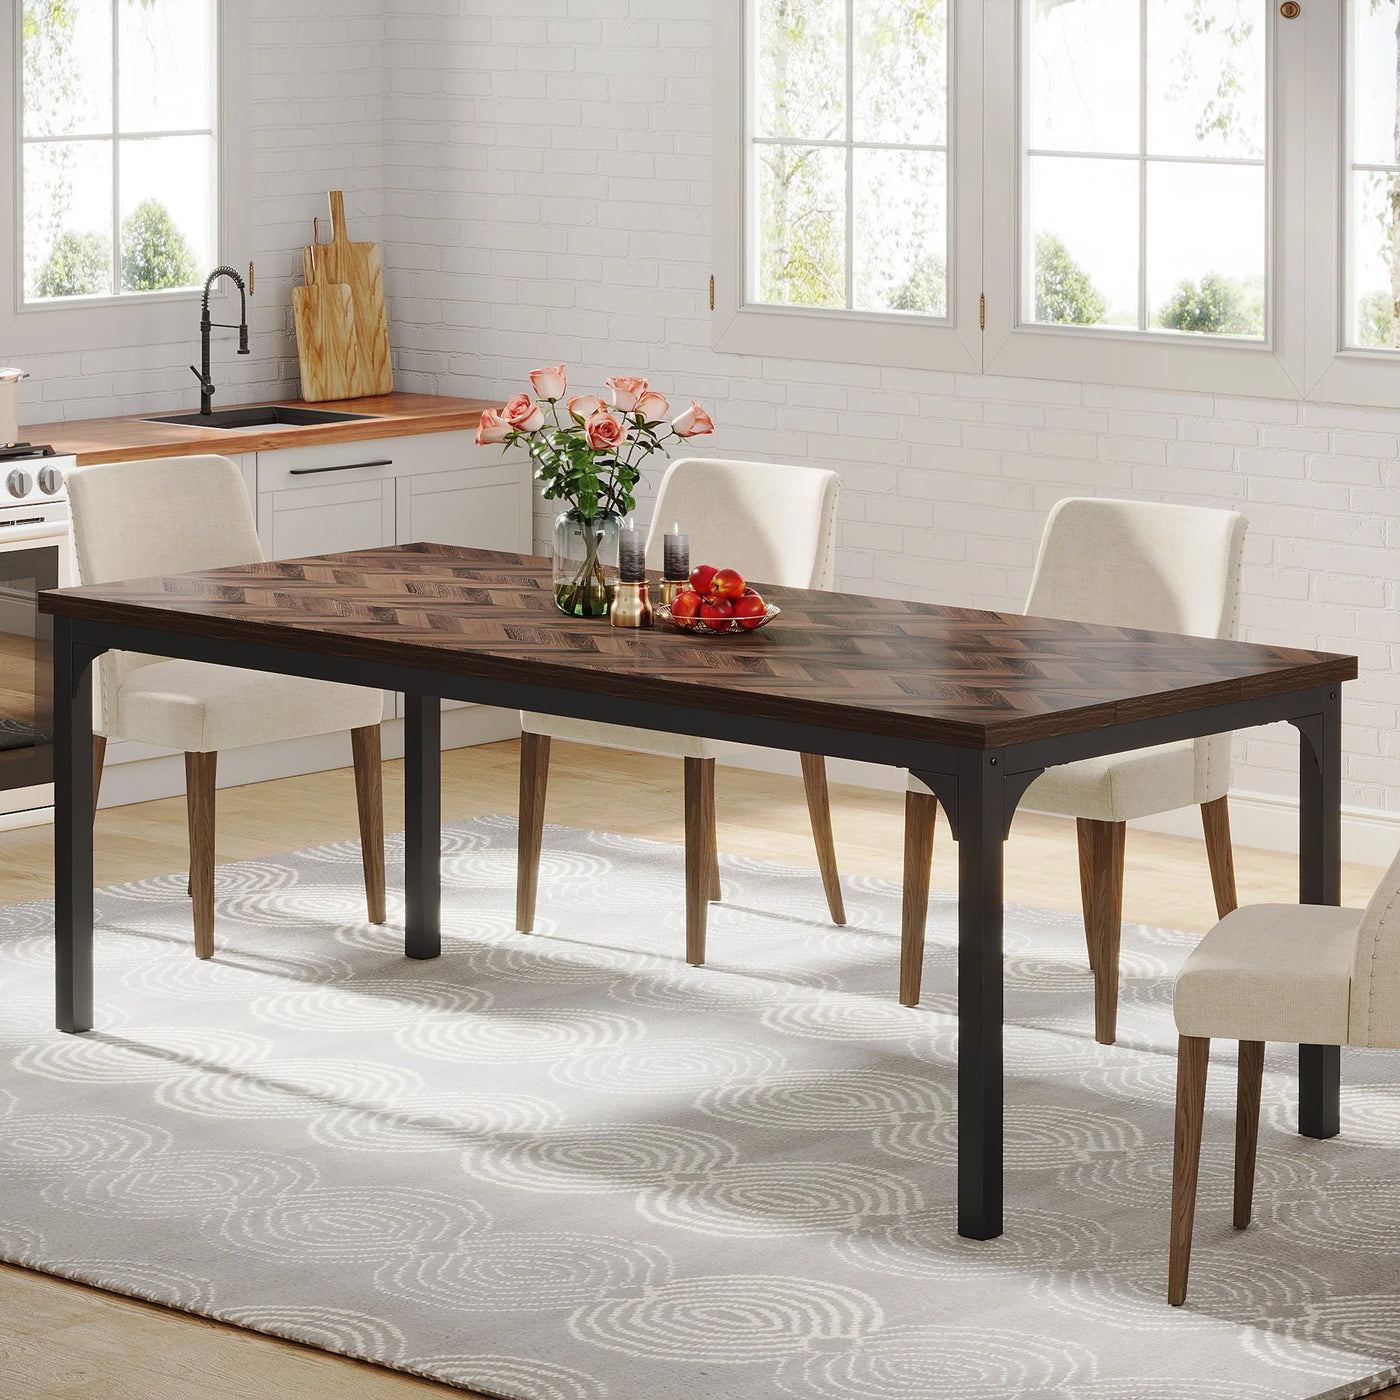 Amour Wood Dining Table | 70.9" Farmhouse Rectangular Rustic Kitchen Dinner Table for 6-8